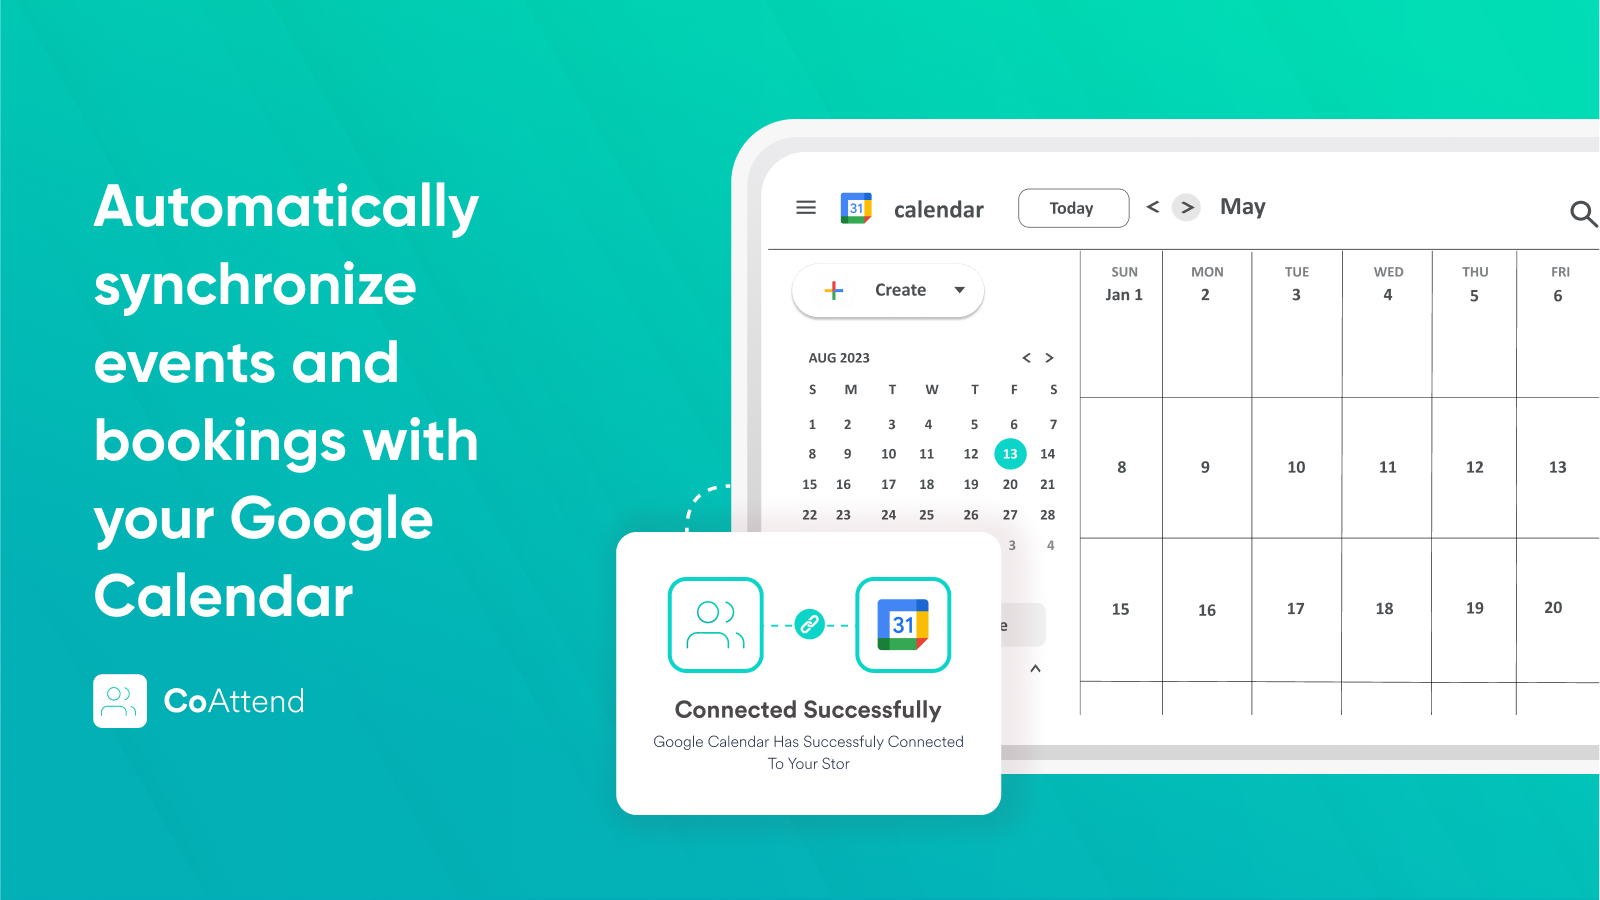 Automatic sync of events and bookings with Google Calendar.